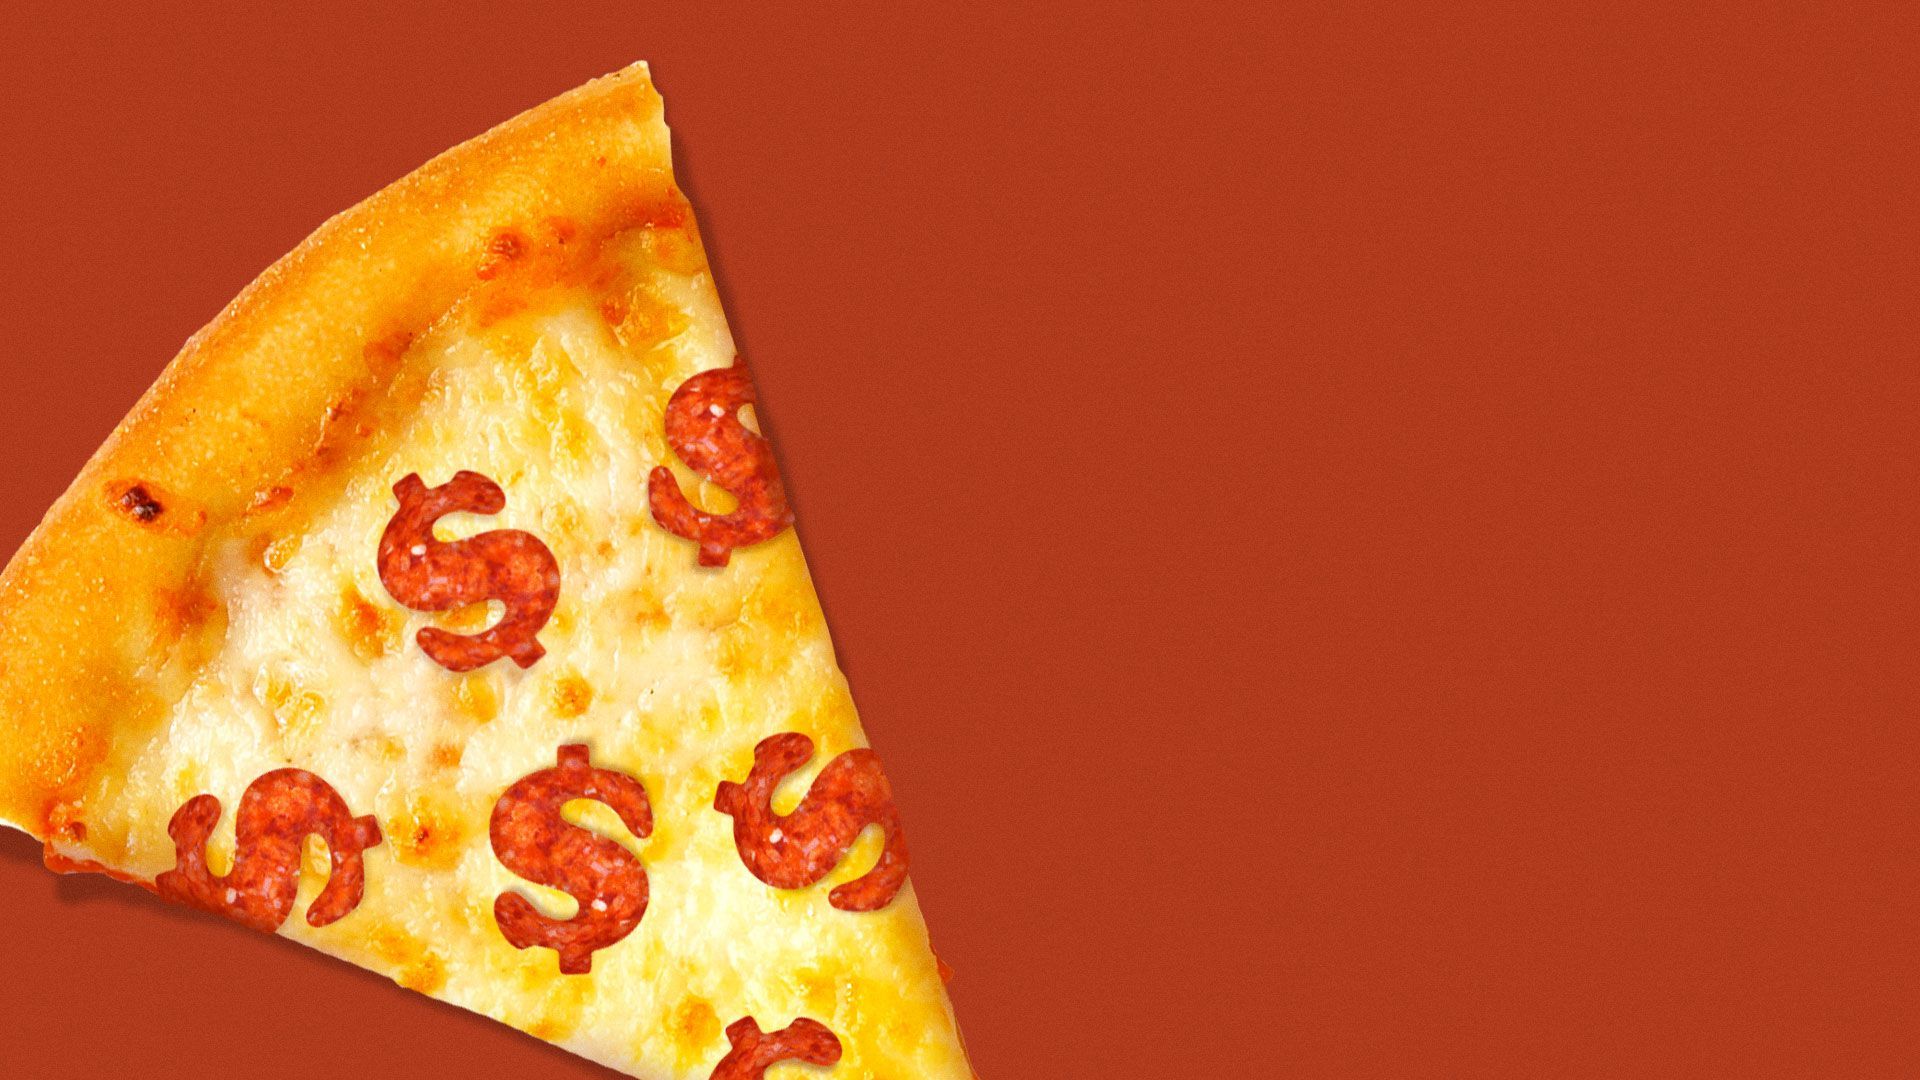 Illustration of a slice of pizza with dollar sign pepperoni slices